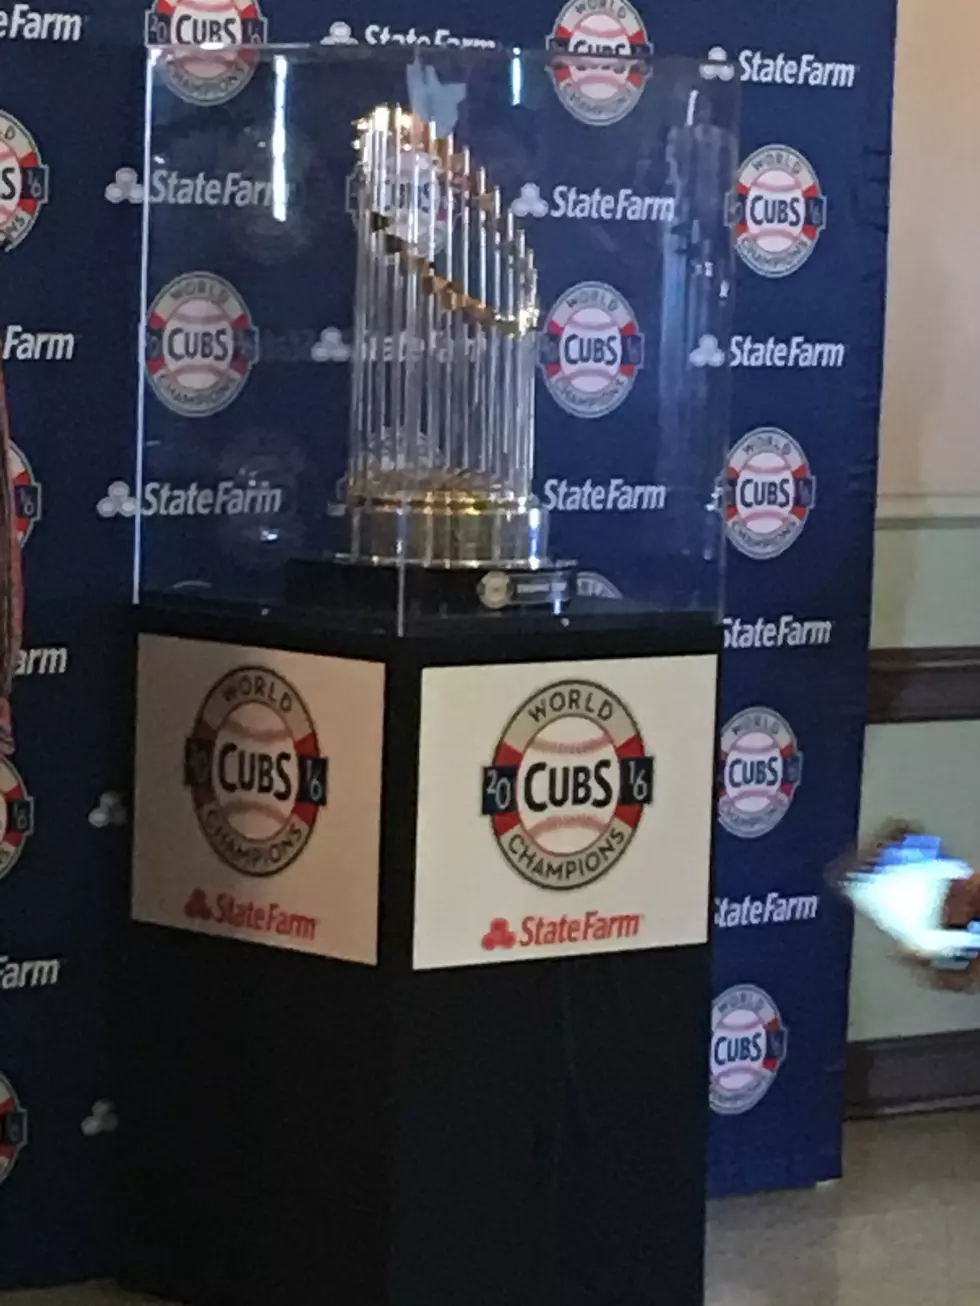 Freeport Did An Excellent Job Hosting the Cubs World Series Trophy